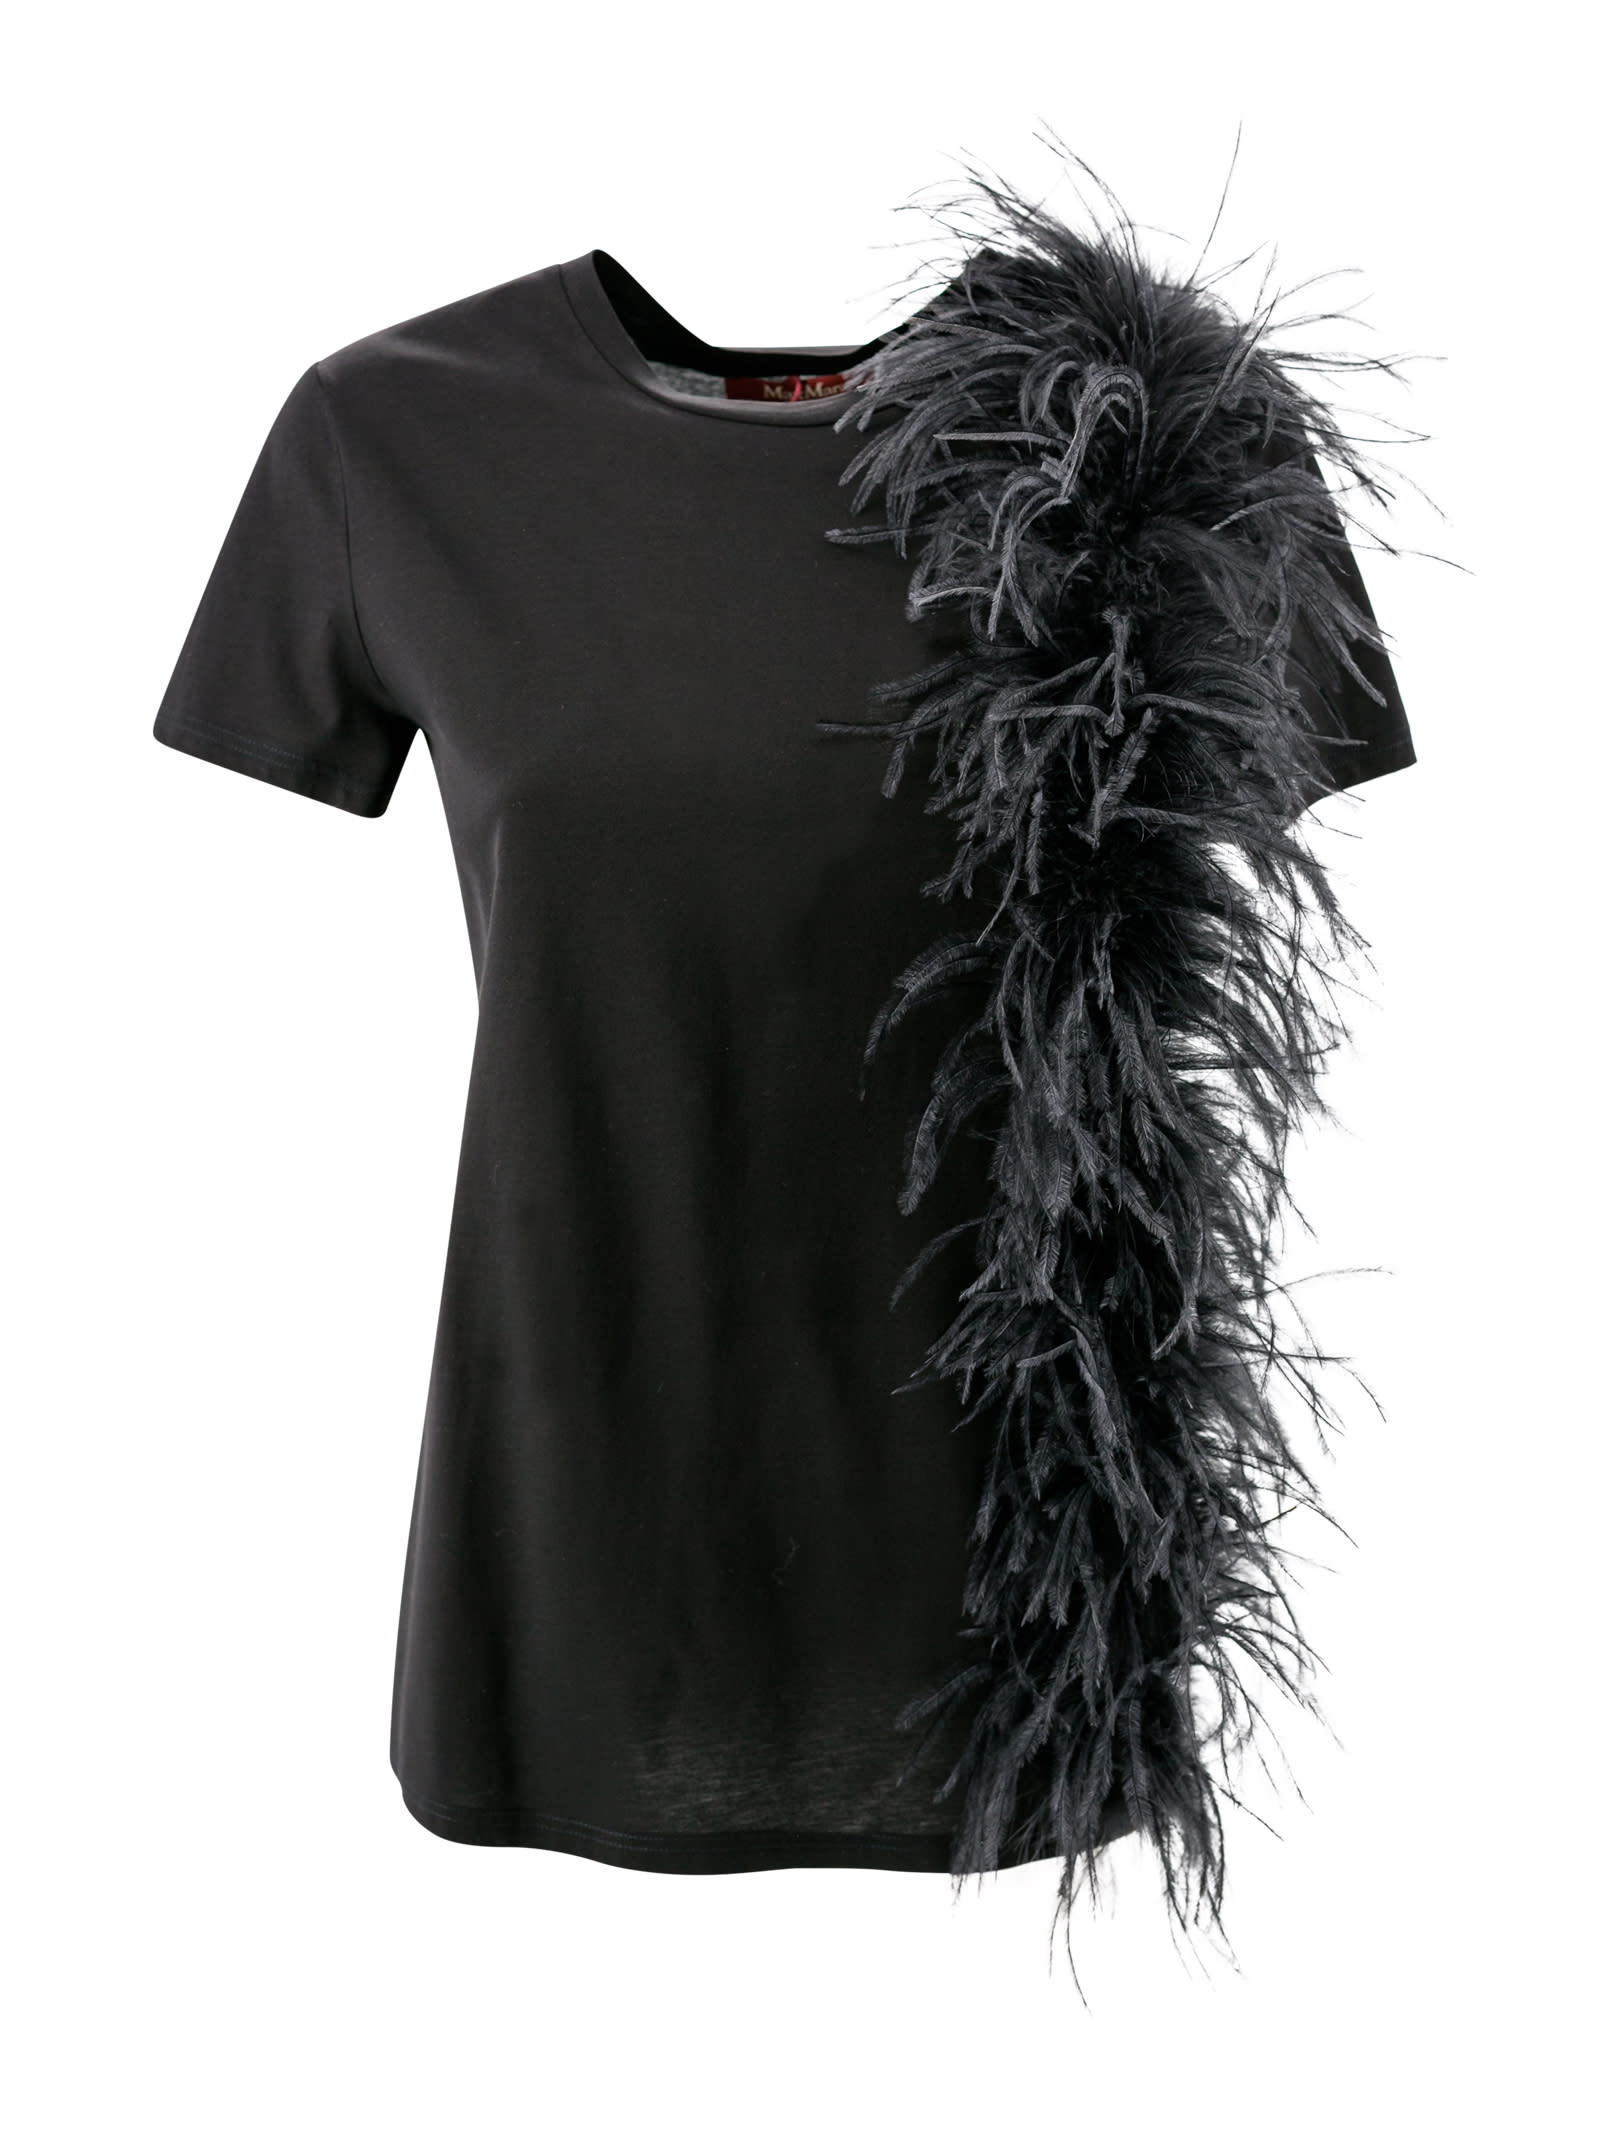 MAX MARA JERSEY T-SHIRT WITH FEATHERS